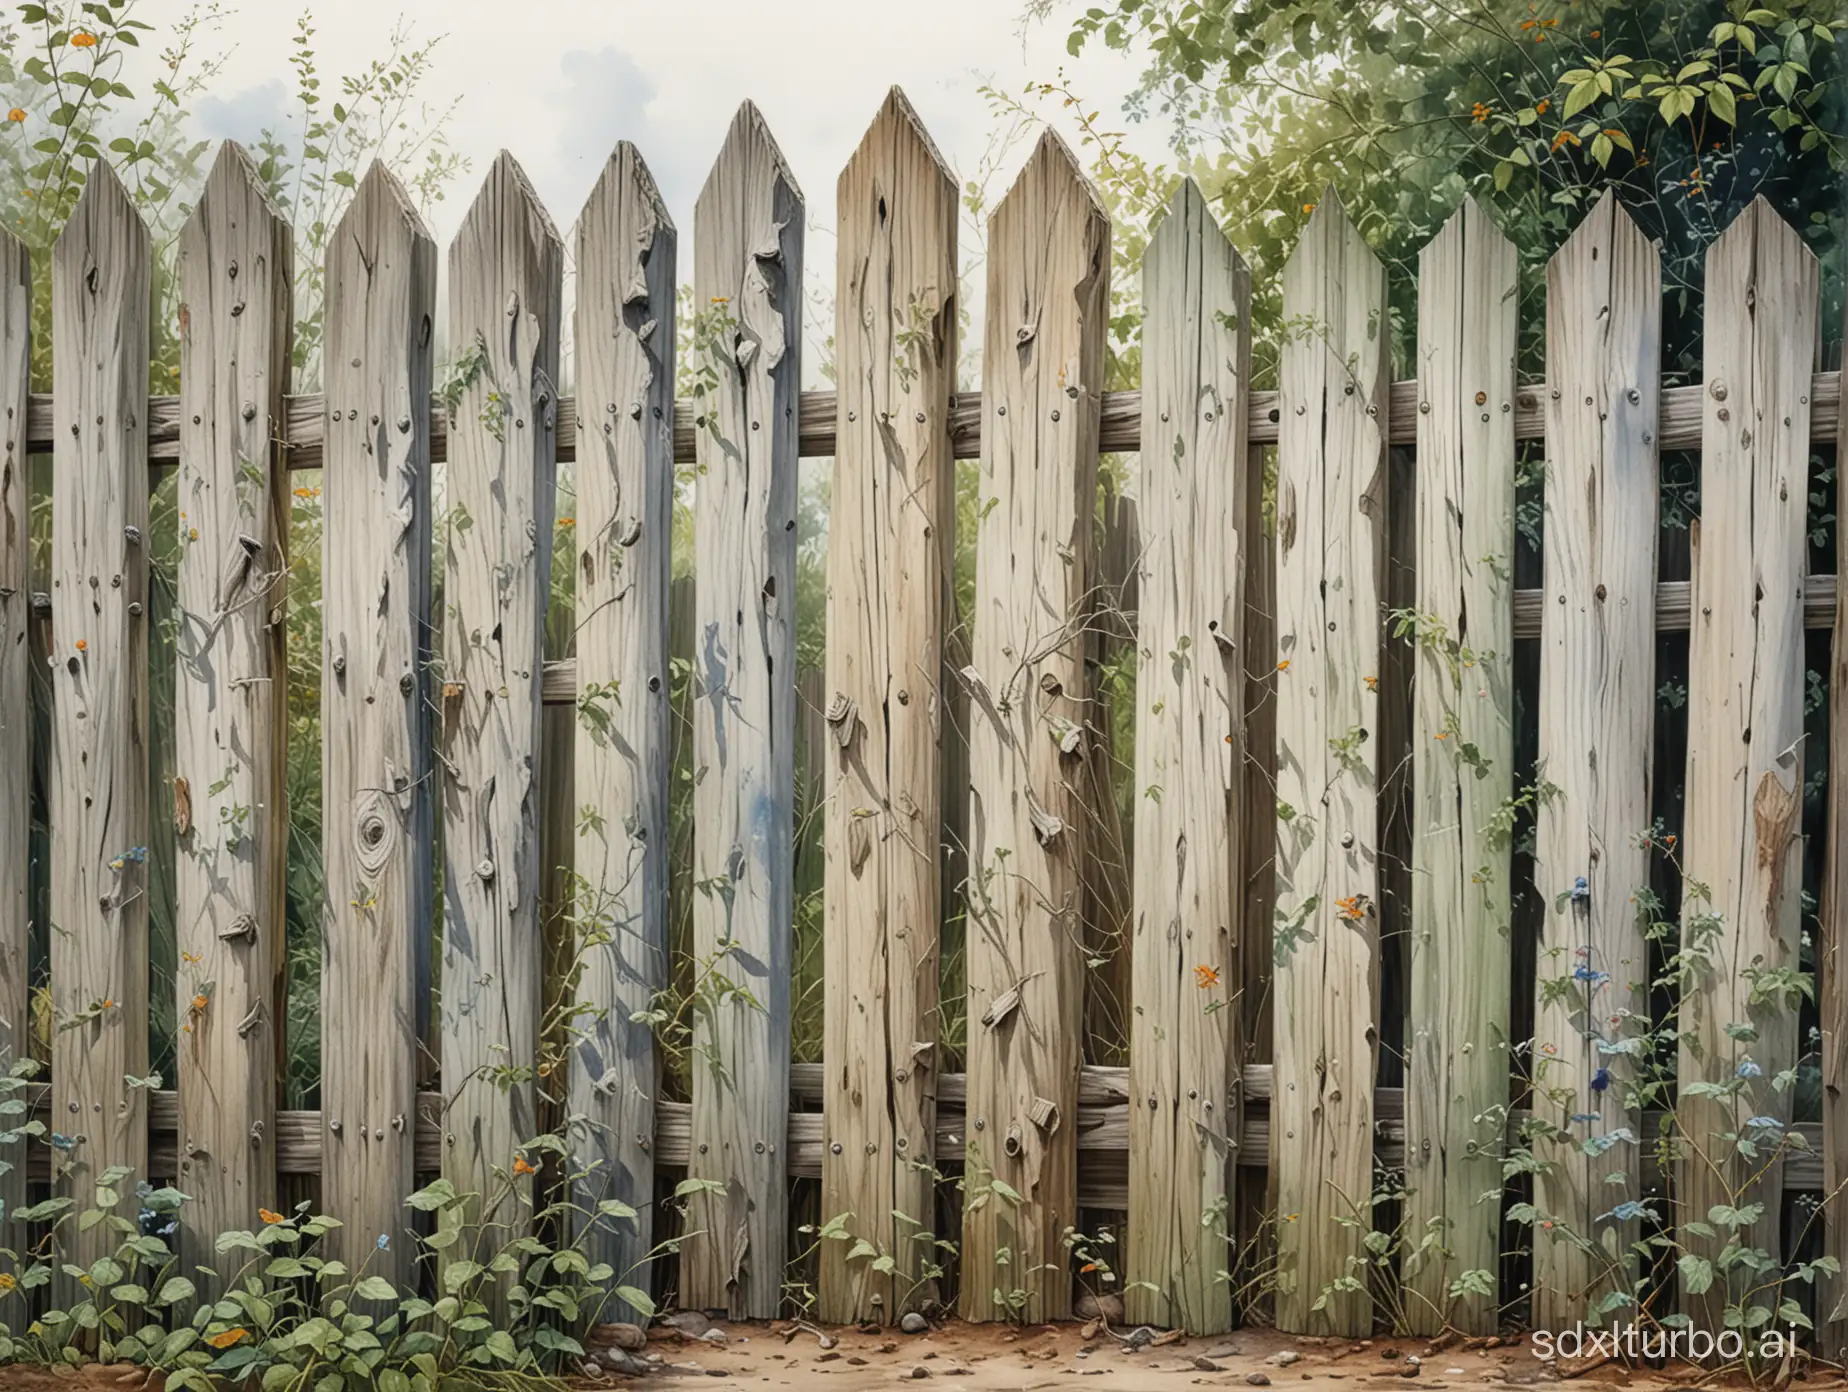 A disheveled wooden fence, highly and delicately detailed drawing, intricate watercolor